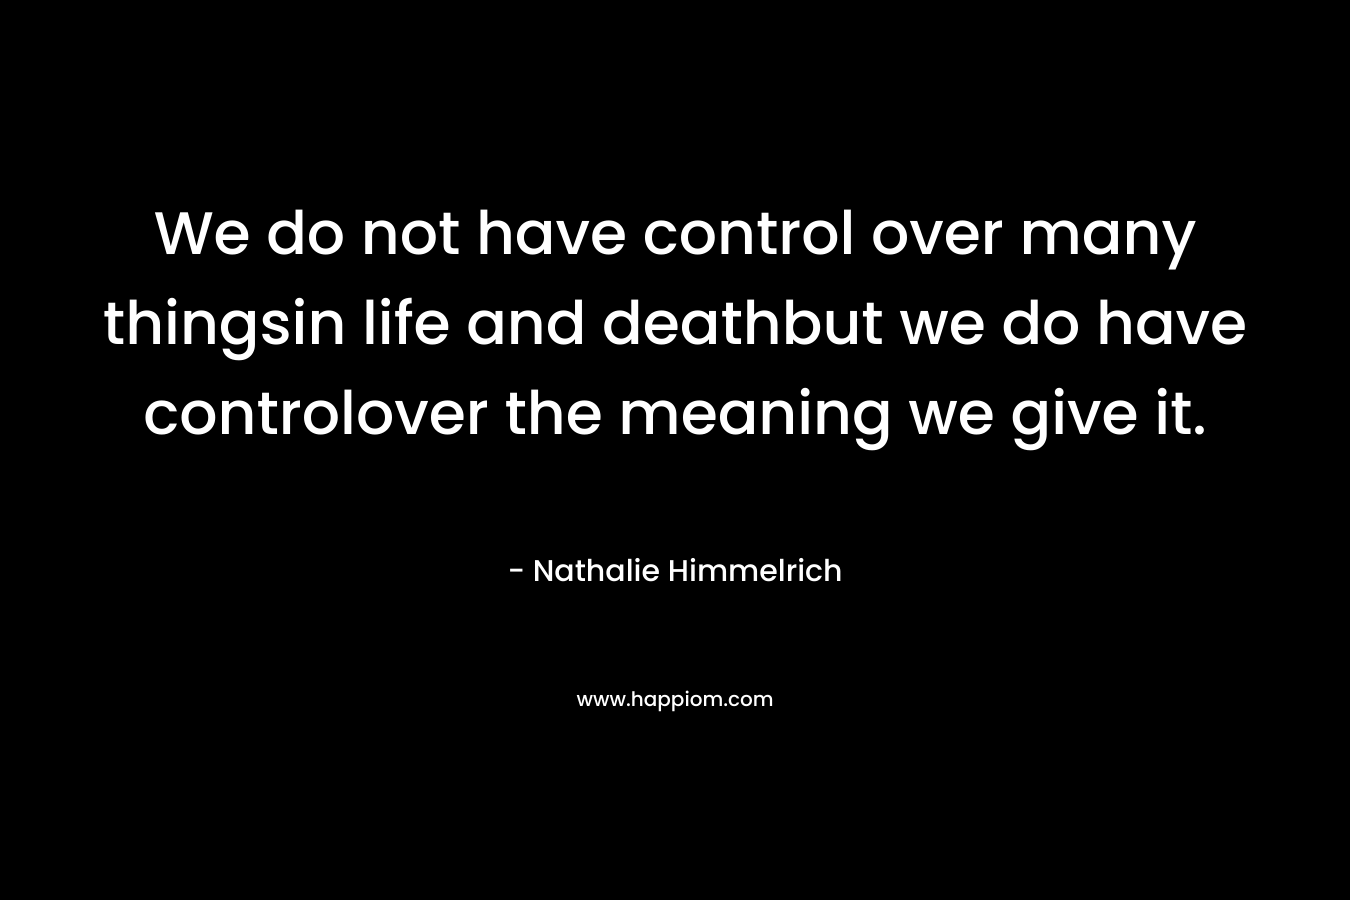 We do not have control over many thingsin life and deathbut we do have controlover the meaning we give it.